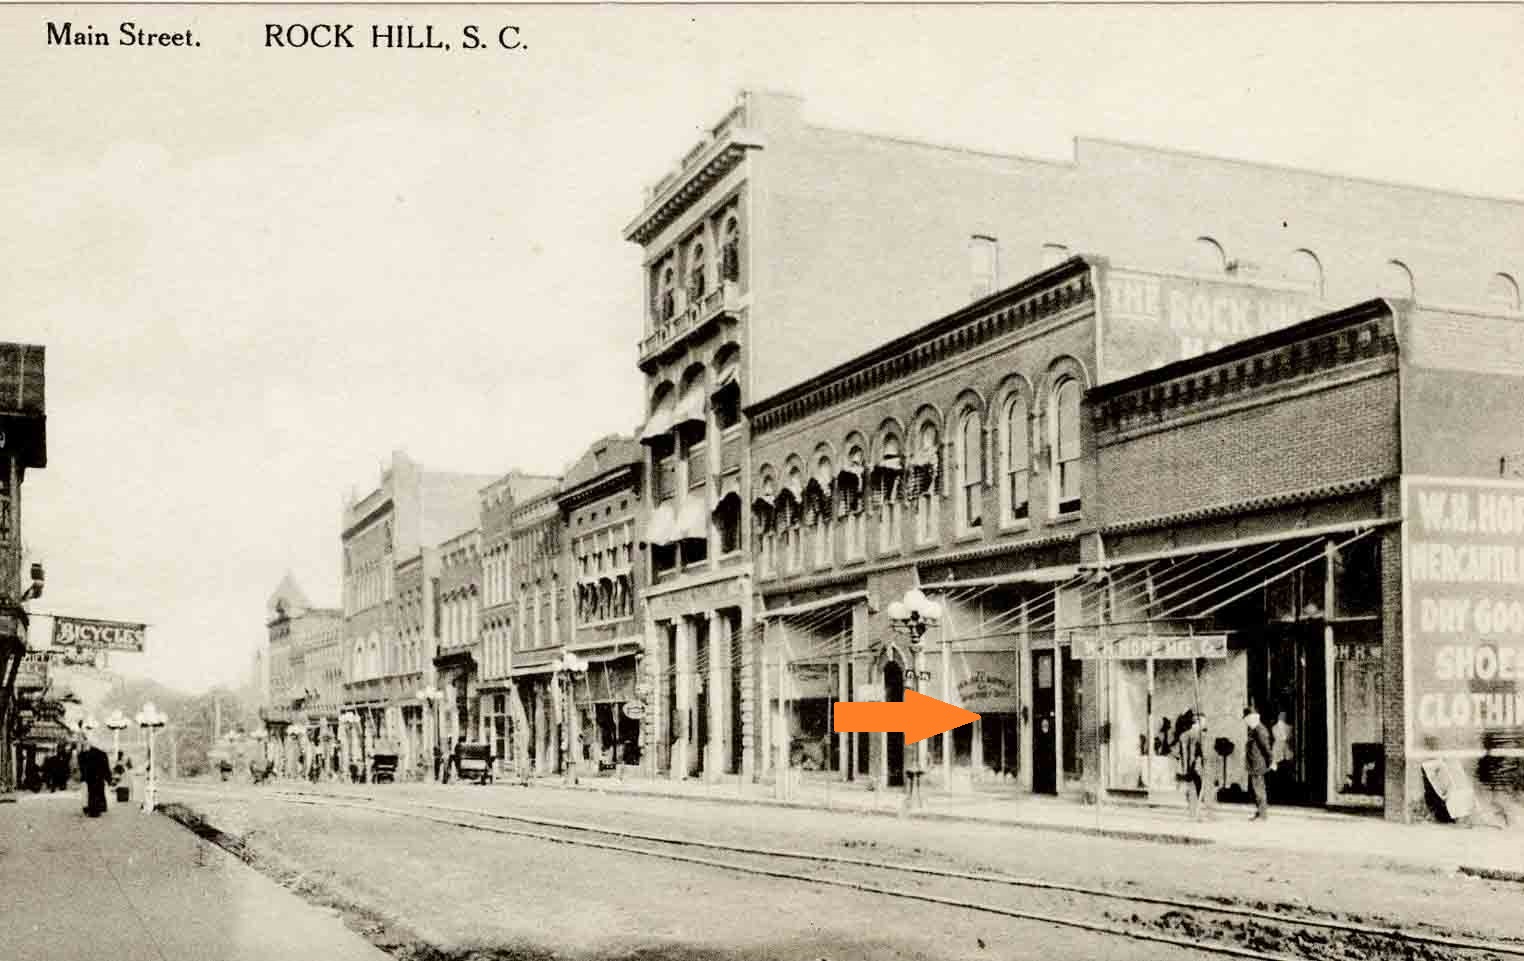 Arrow showing the location of the Cranford Co., next to the RH Supply Co., (they shared a building), the Cranford Co., had originally occupied the building on the opposite side of the Peoples Bank.  Courtesy of the Allen Postcard Collection - 2012